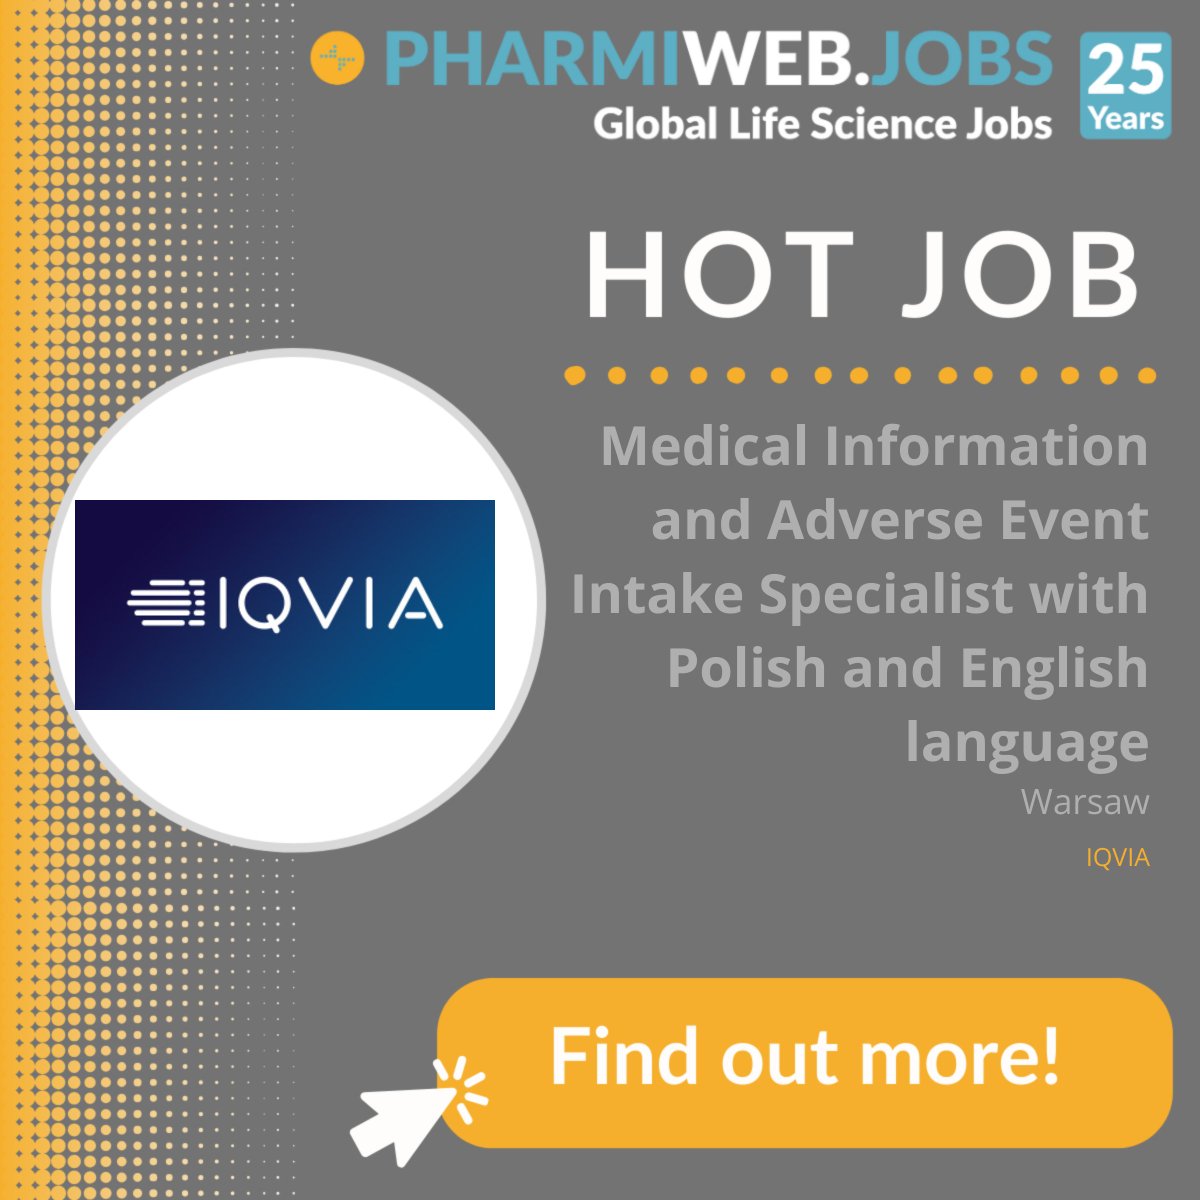 Medical Information and Adverse Event Intake Specialist with Polish and English language
- pharmiweb.jobs/job/1769227?ut…

#MedicalInformation #AdverseEvents #medComms #PolishMedComms #Iqvia #PharmiWeb